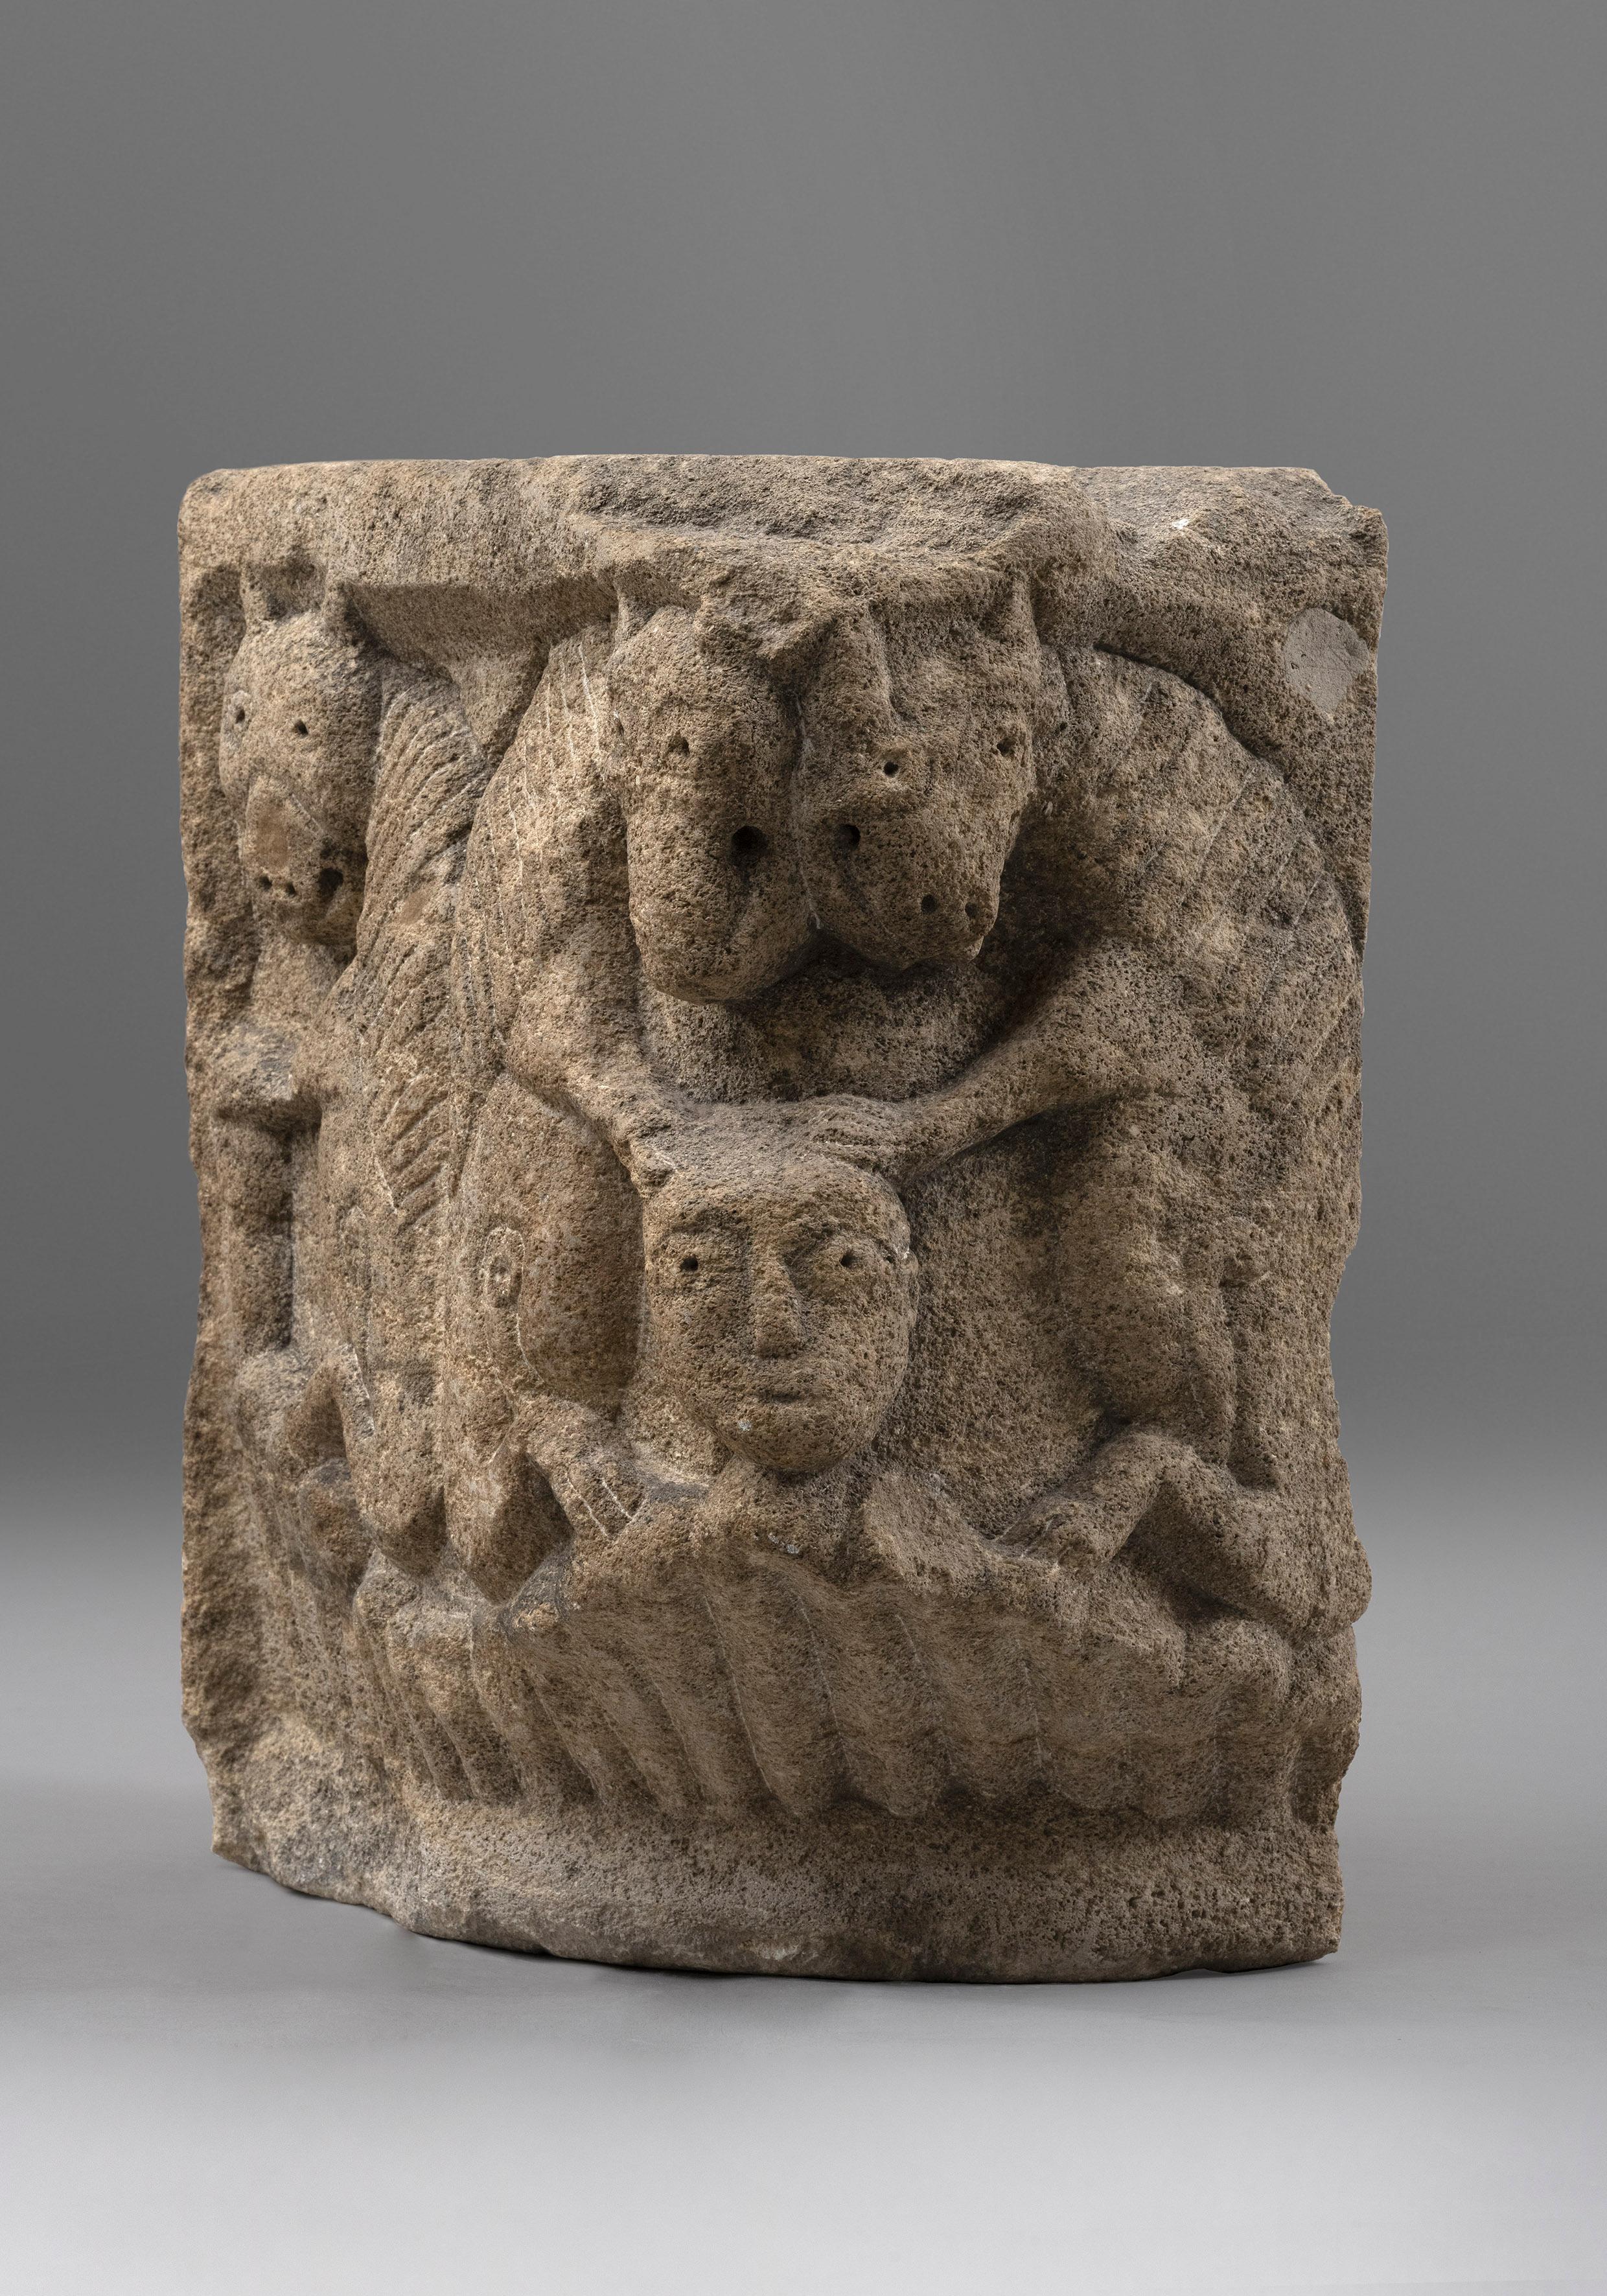 Engaged Romanesque capital representing Daniel in the Lion’s den
France, 12th century
Limestone
38 x 29 x 18 cm

Provenance : Private collection Brugge, Belgique

This intriguant and rare engaged capital is decorated in two sides with